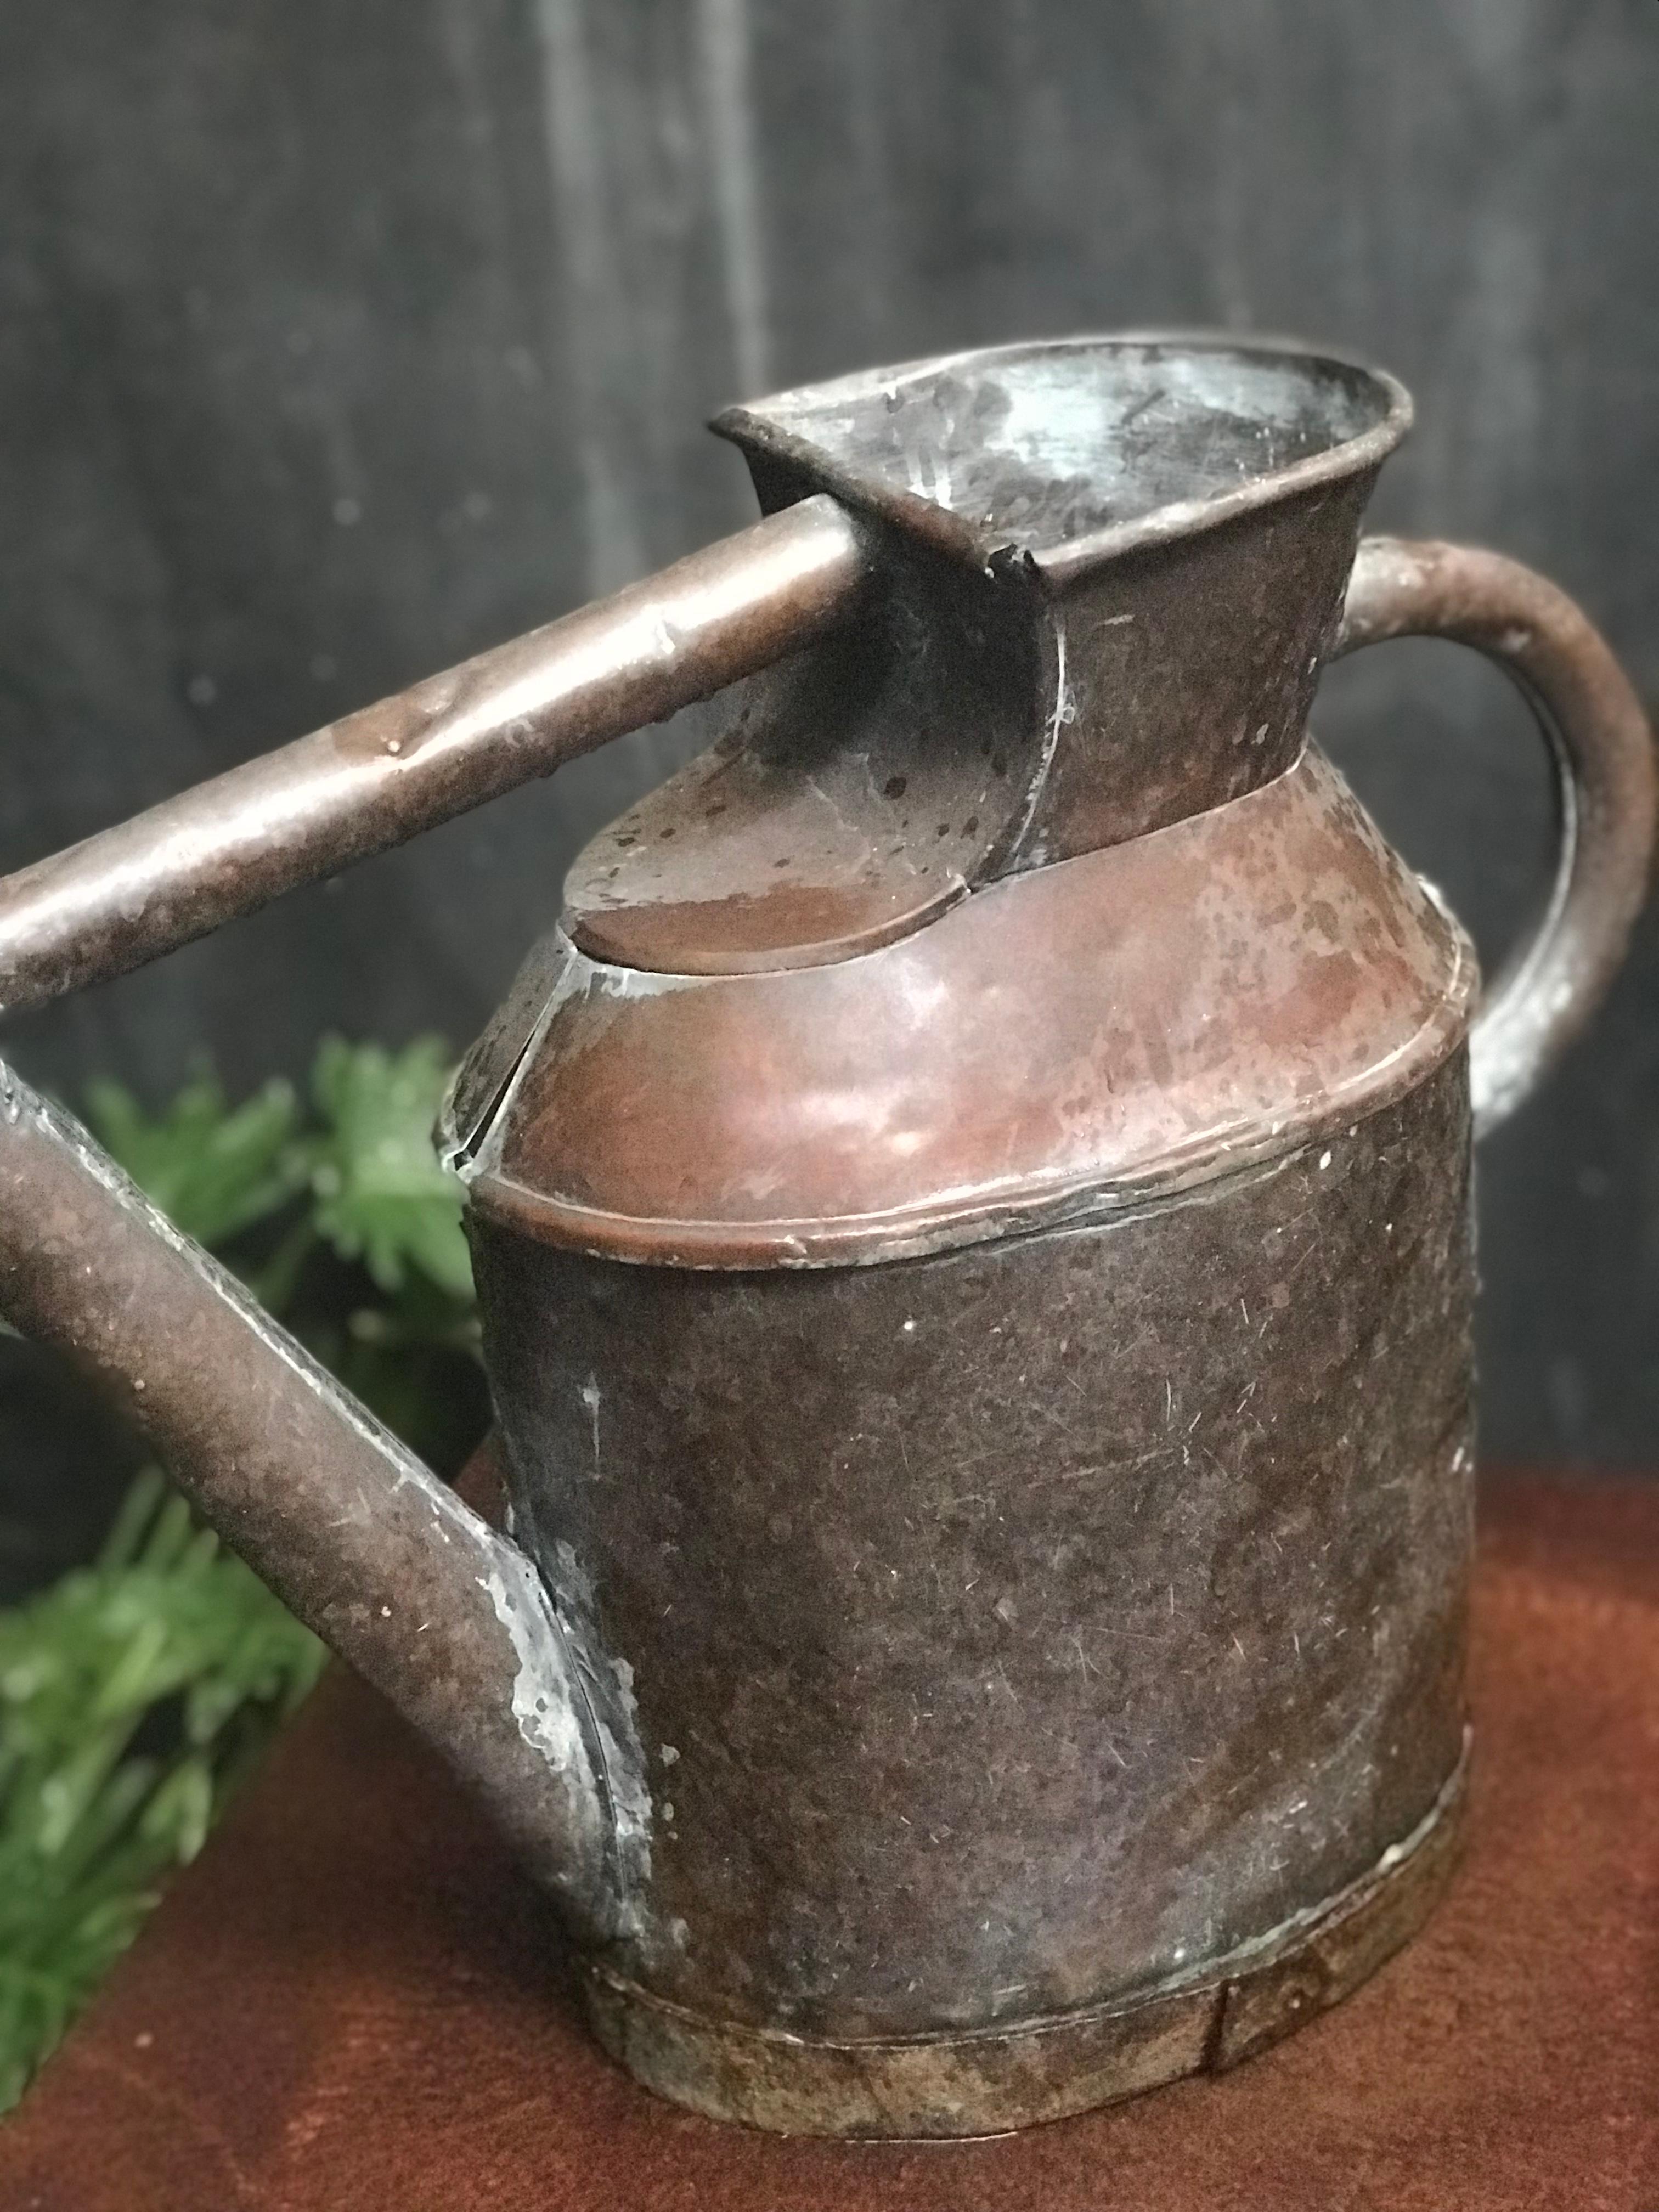 Victorian English Watering Can in Copper from mid-19th century